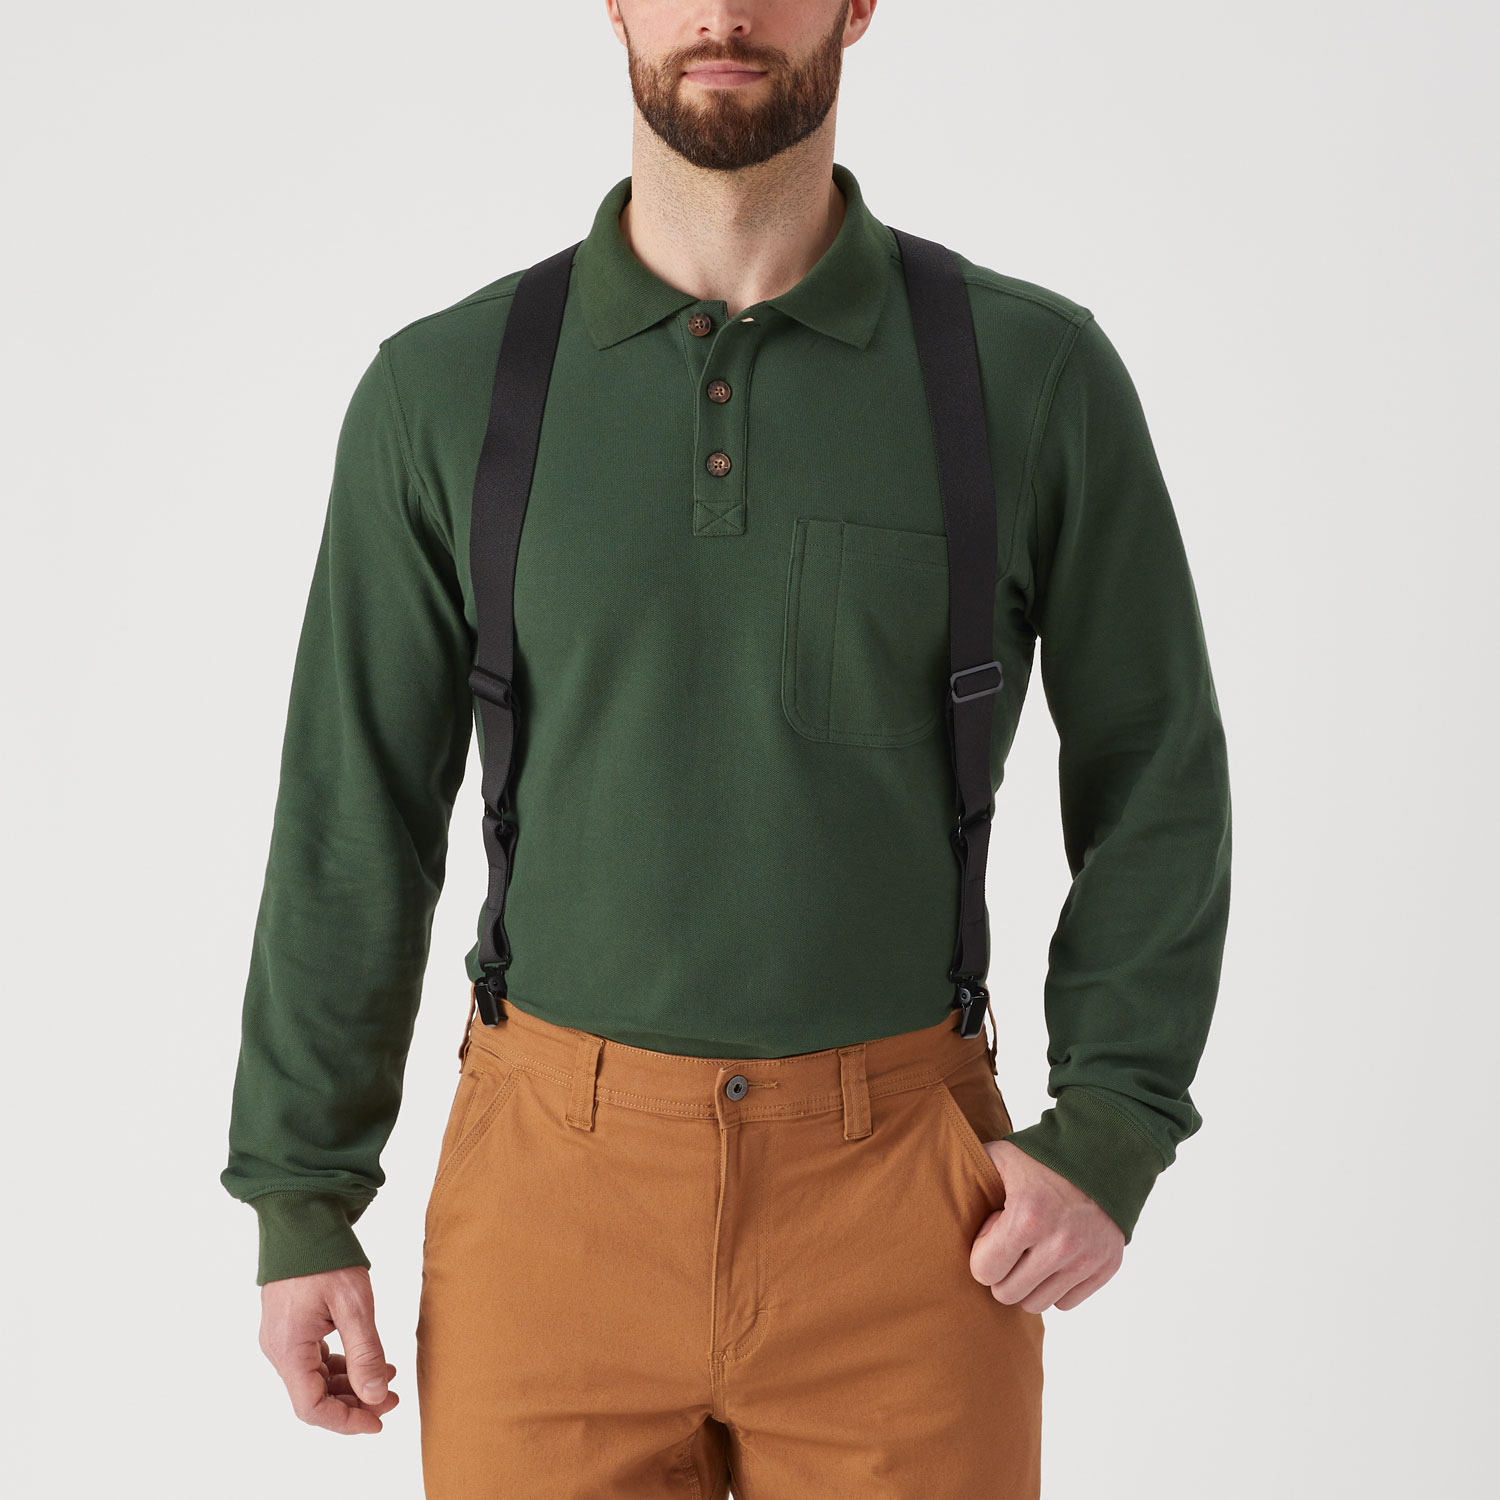 Duluth X-Back Tall Side Clip Suspenders